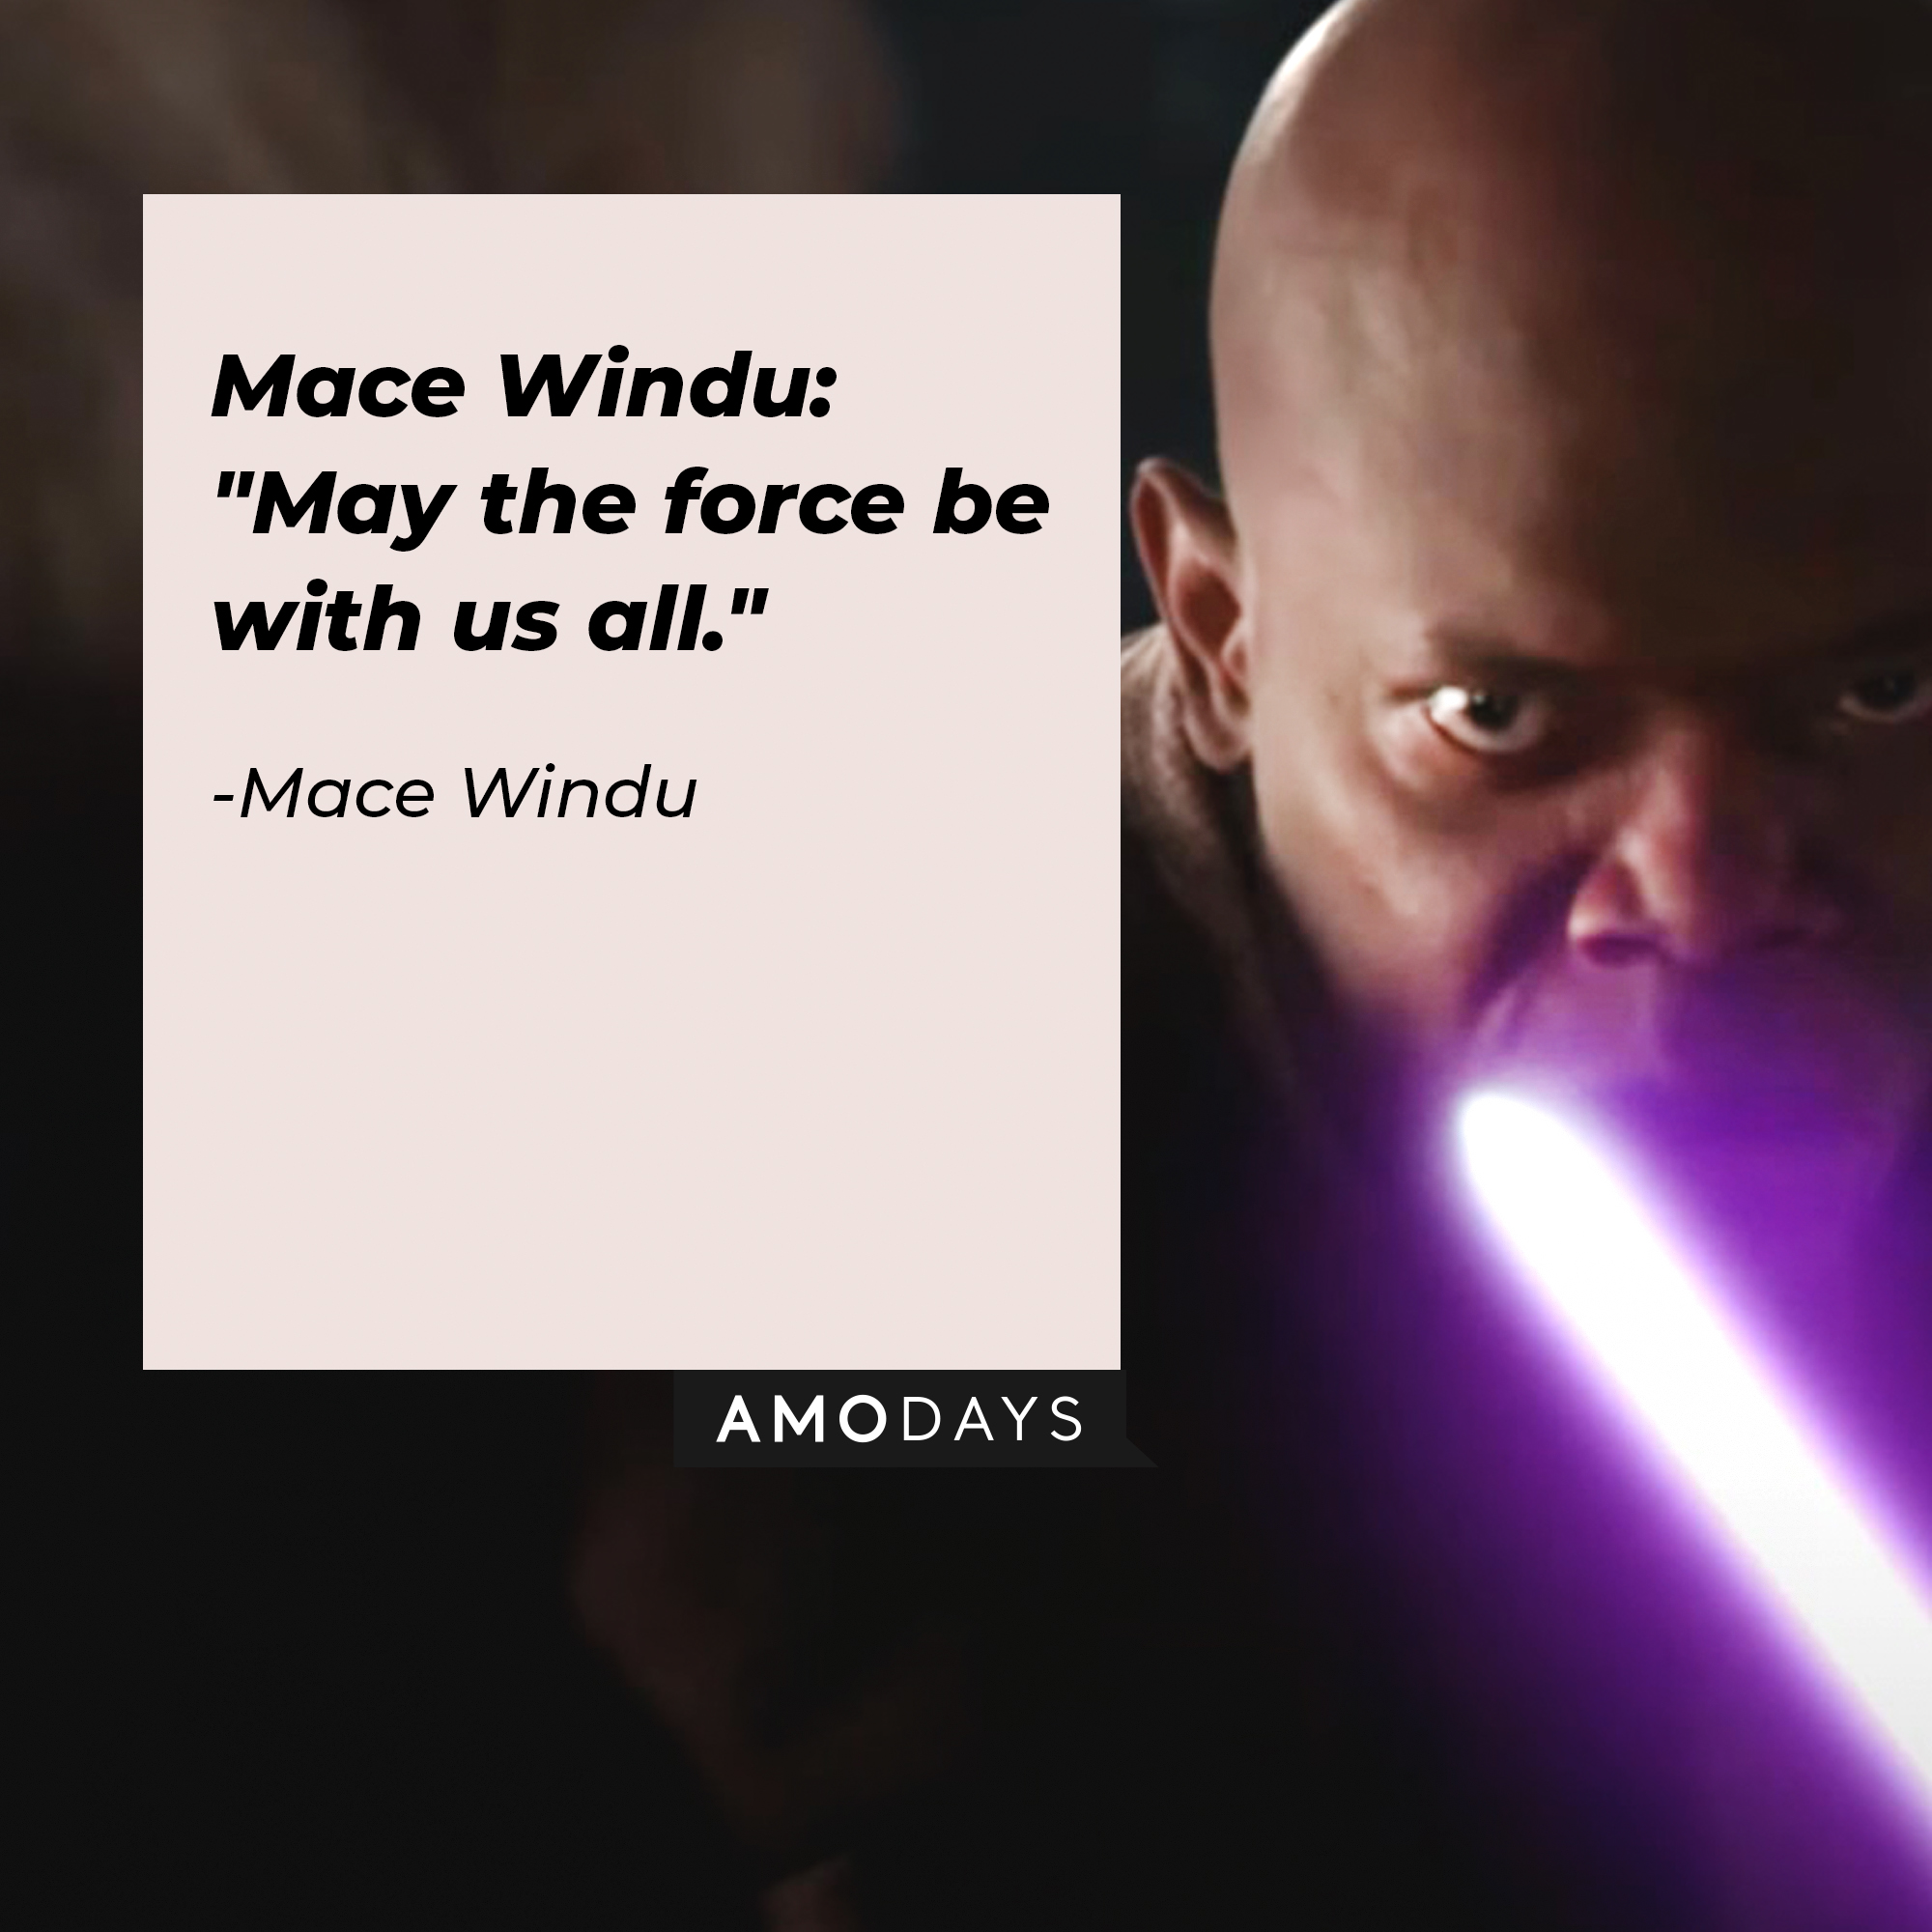 Mace Windu's quote: "May the force be with us all." | Image: Facebook / StarWars.UK